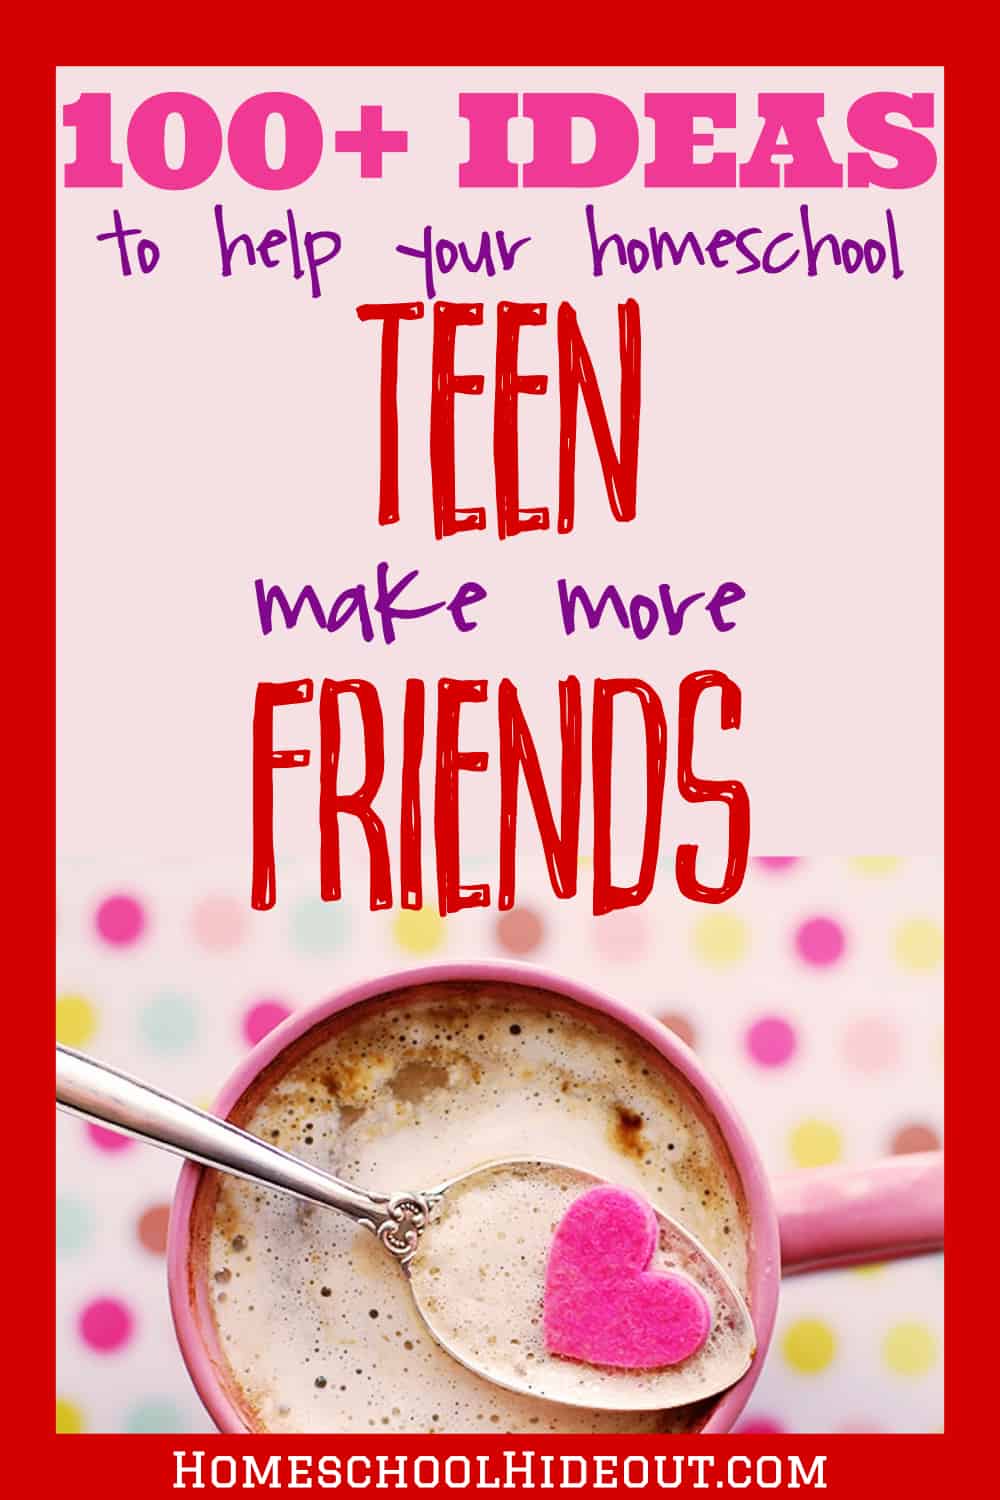 Are you struggling to socaialize homeschool teens? You aren't alone! With over 100 ideas for homeschool teen activities, you won't have to struggle anymore. #friends #teens #homeschool #homeschoolers #homeschooling #teenactivities #groupactivities